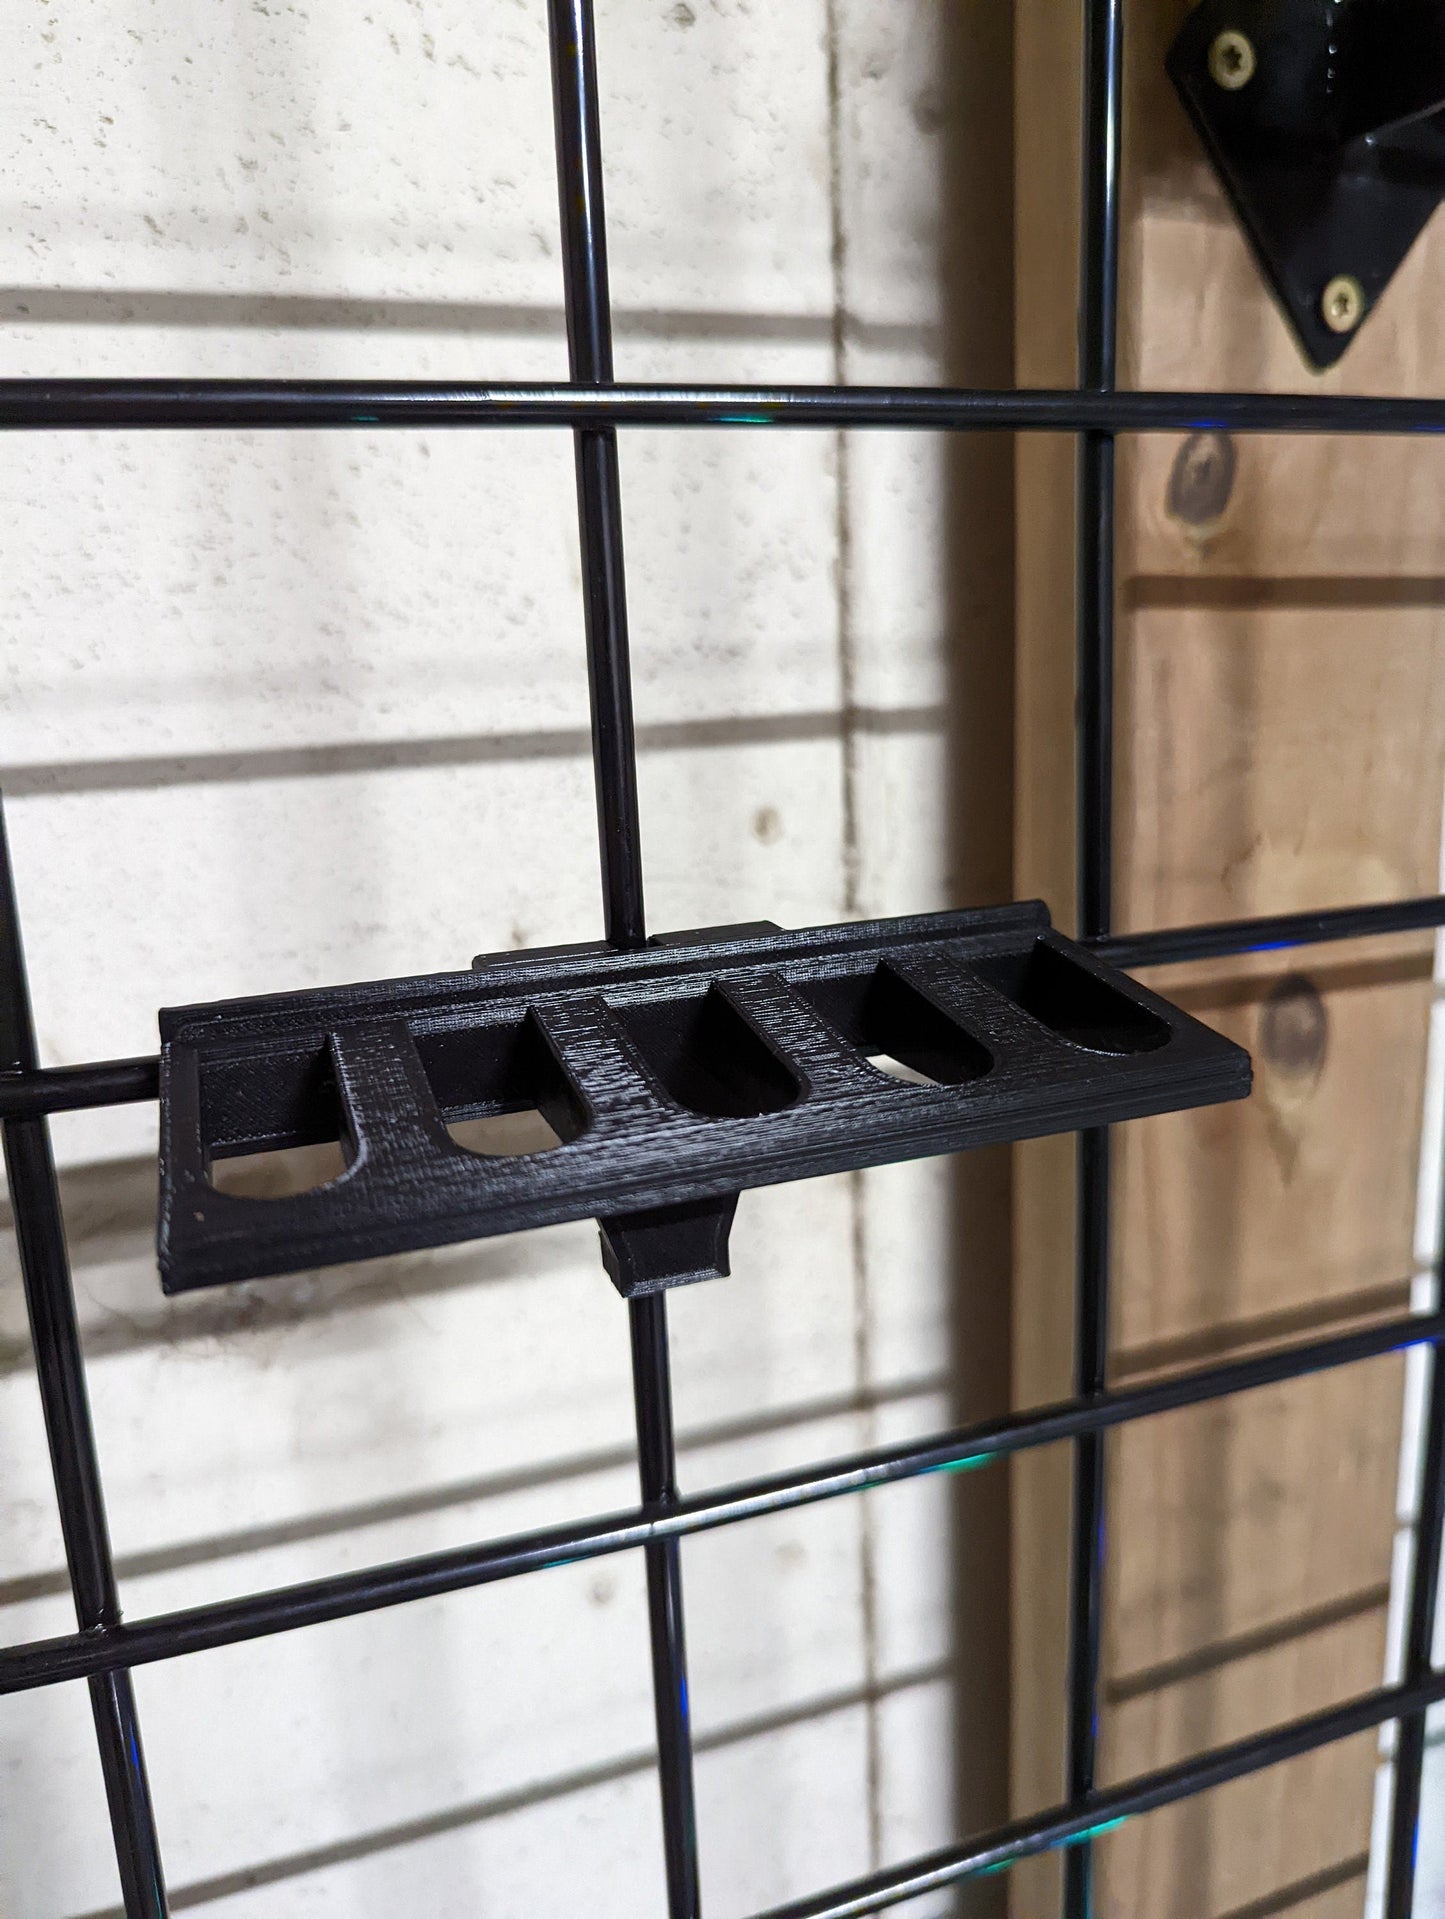 Mount for Springfield XDS / XD-S Mags - Gridwall | Magazine Holder Storage Rack